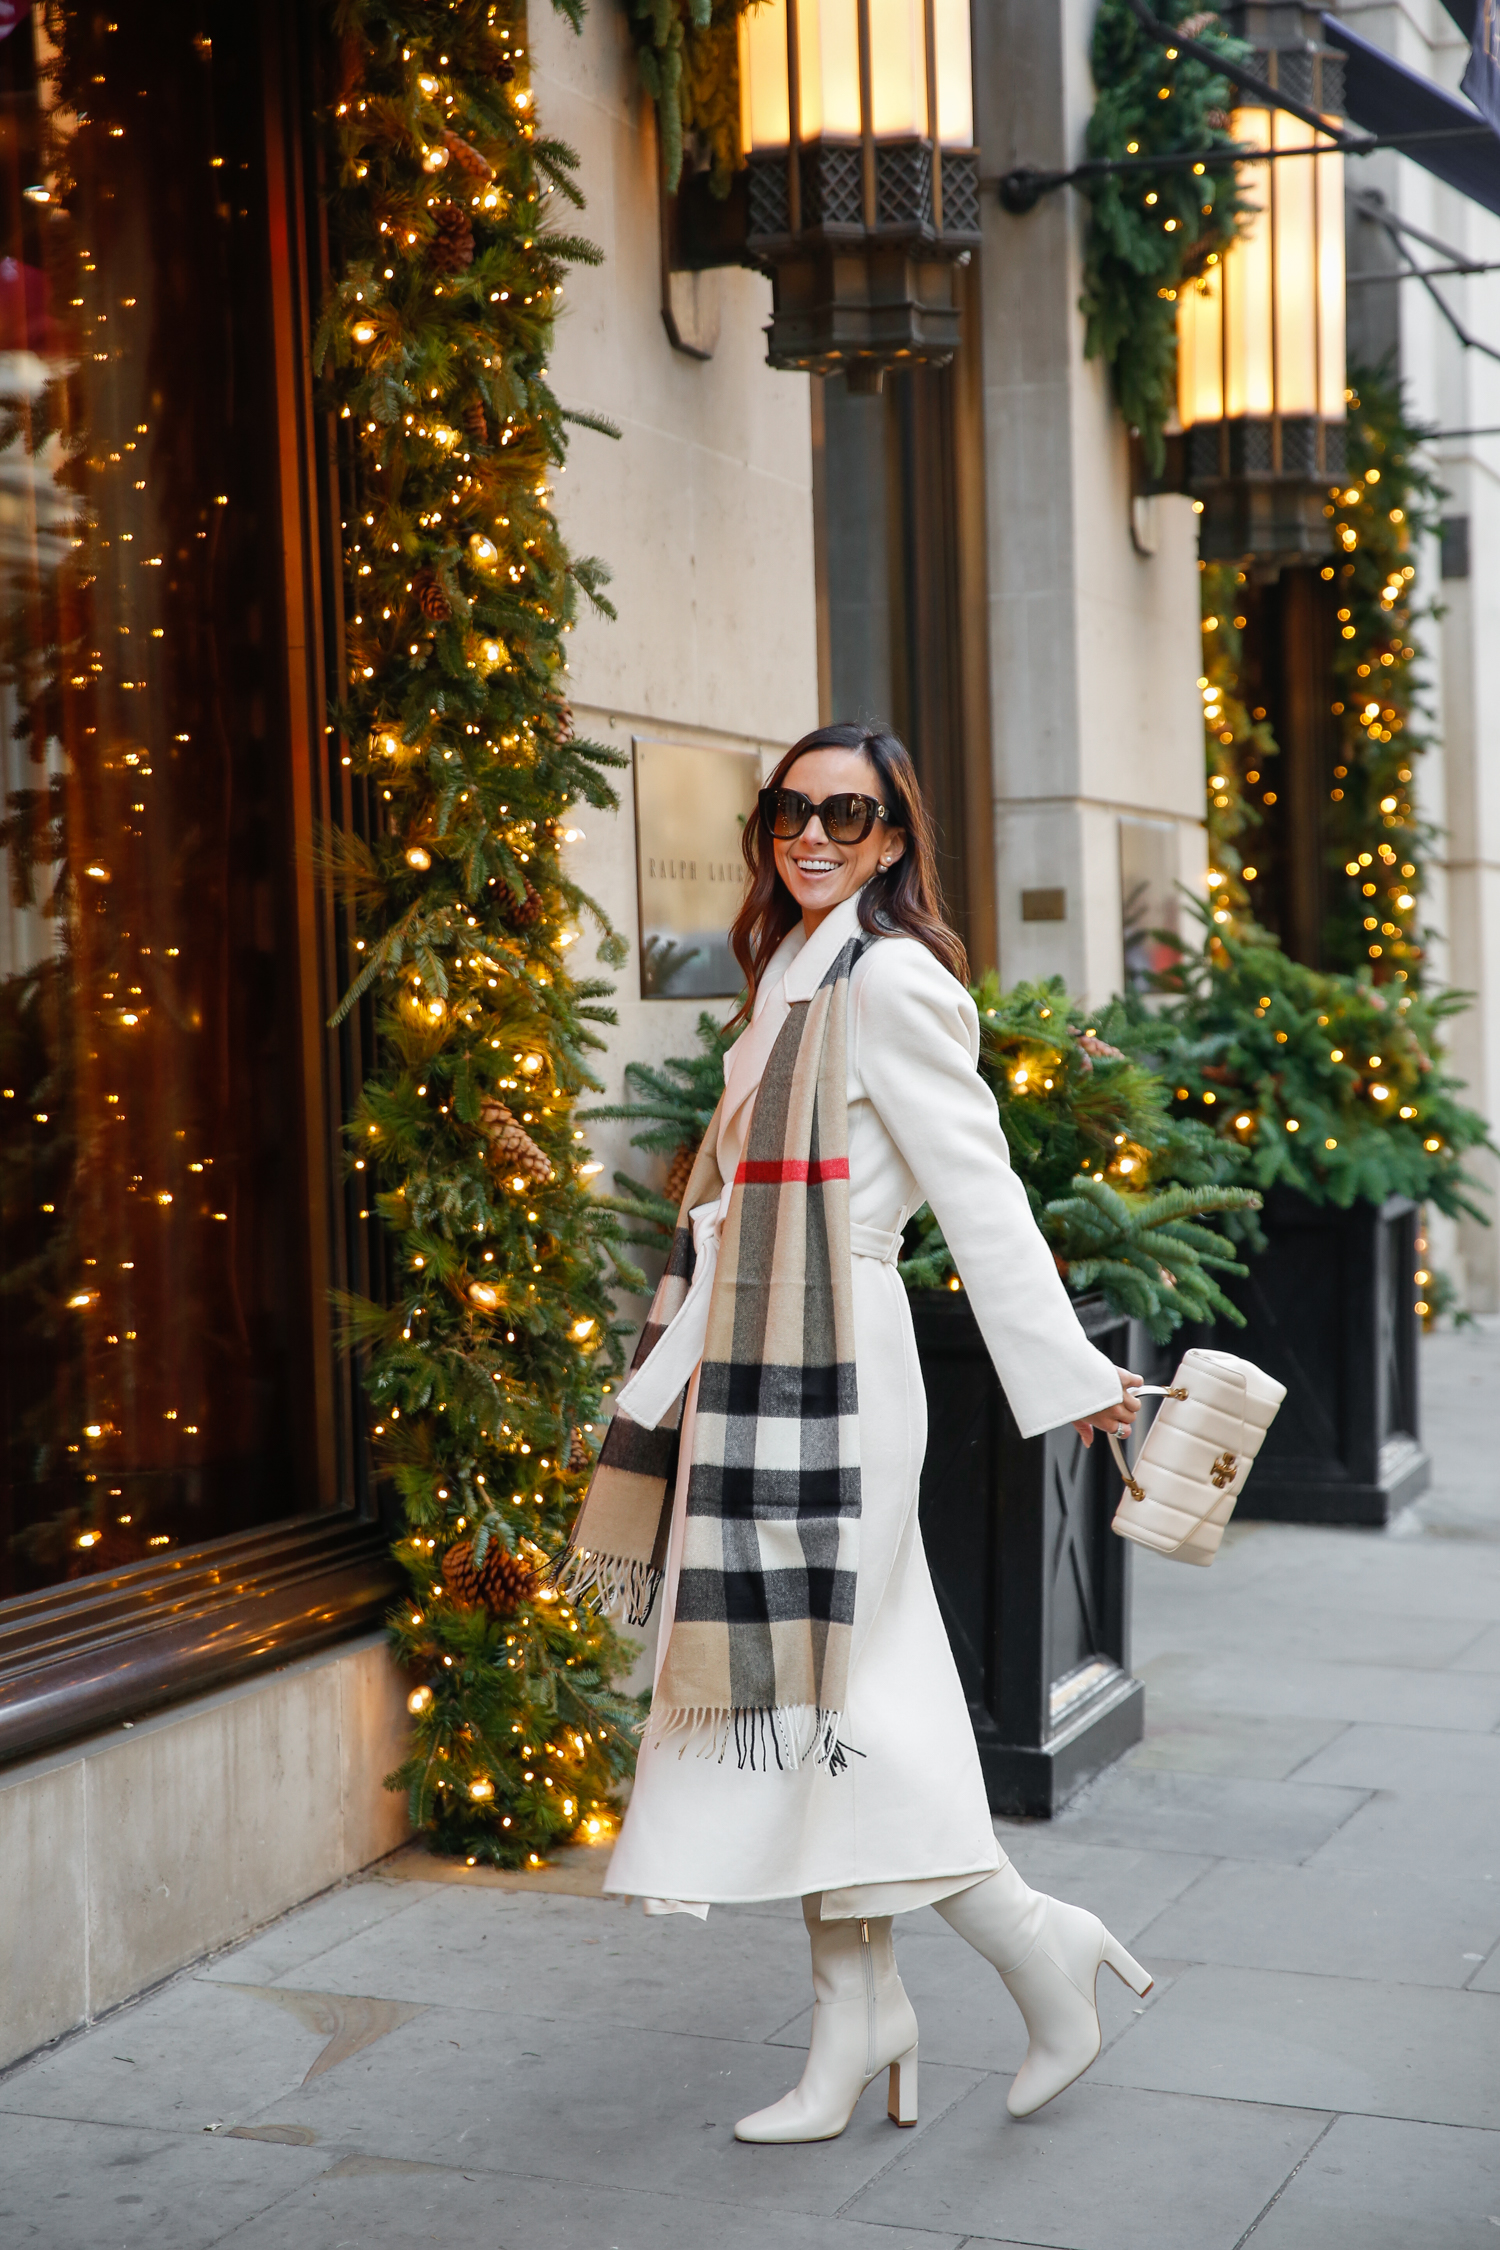 TODAY IM WEARING  CHRISTMAS JUMPER & VICTOIRE BAG 3 - Fashion & Personal  Stylist London